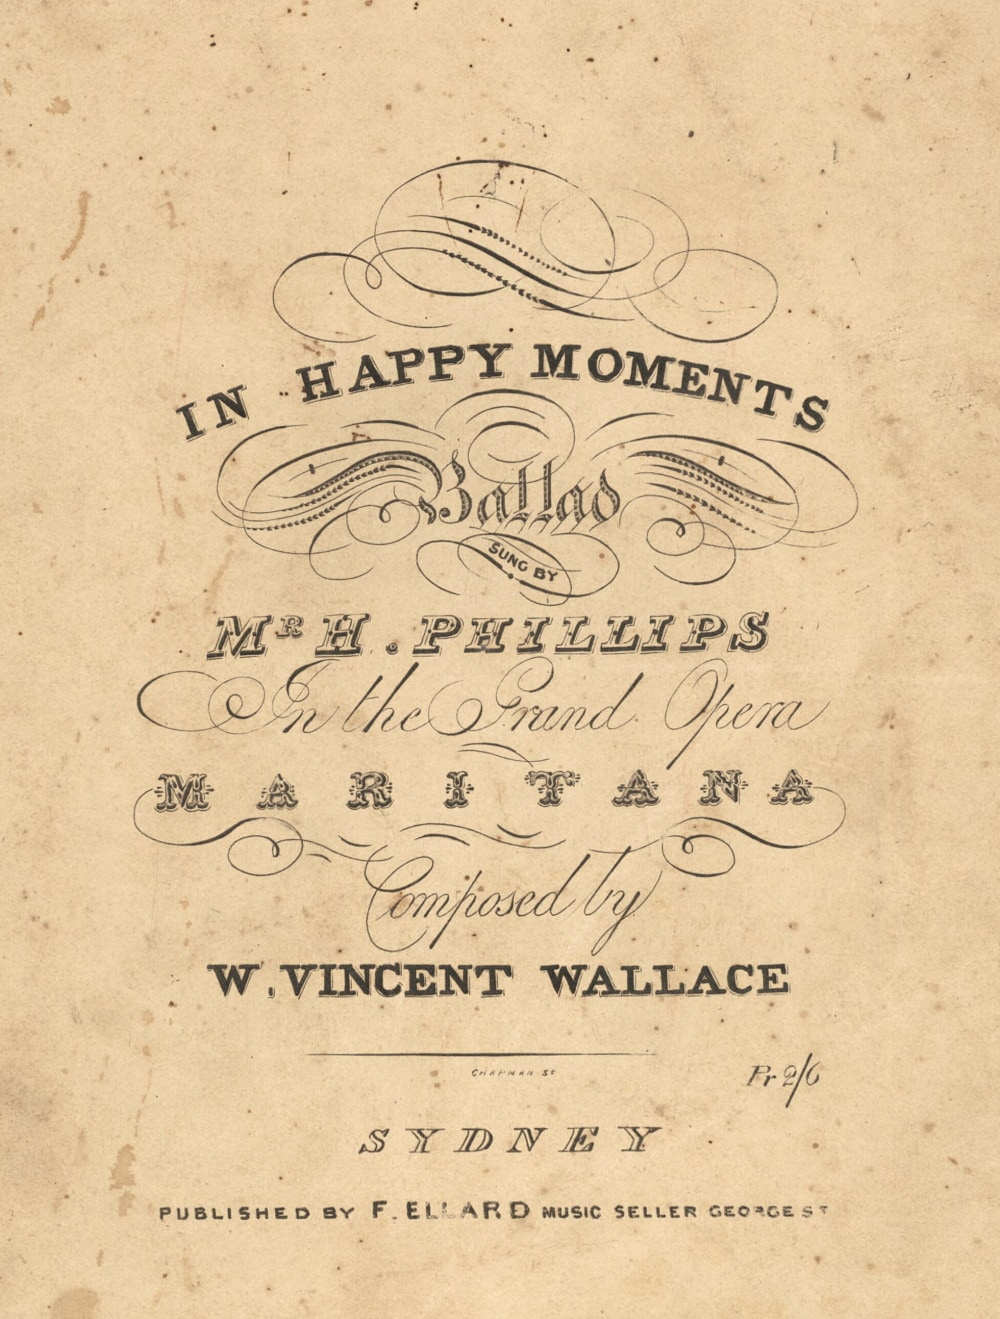 In happy moments, ballad . . . in the grand opera Maritana composed by W. Vincent Wallace (Sydney: F. Ellard, [1846])